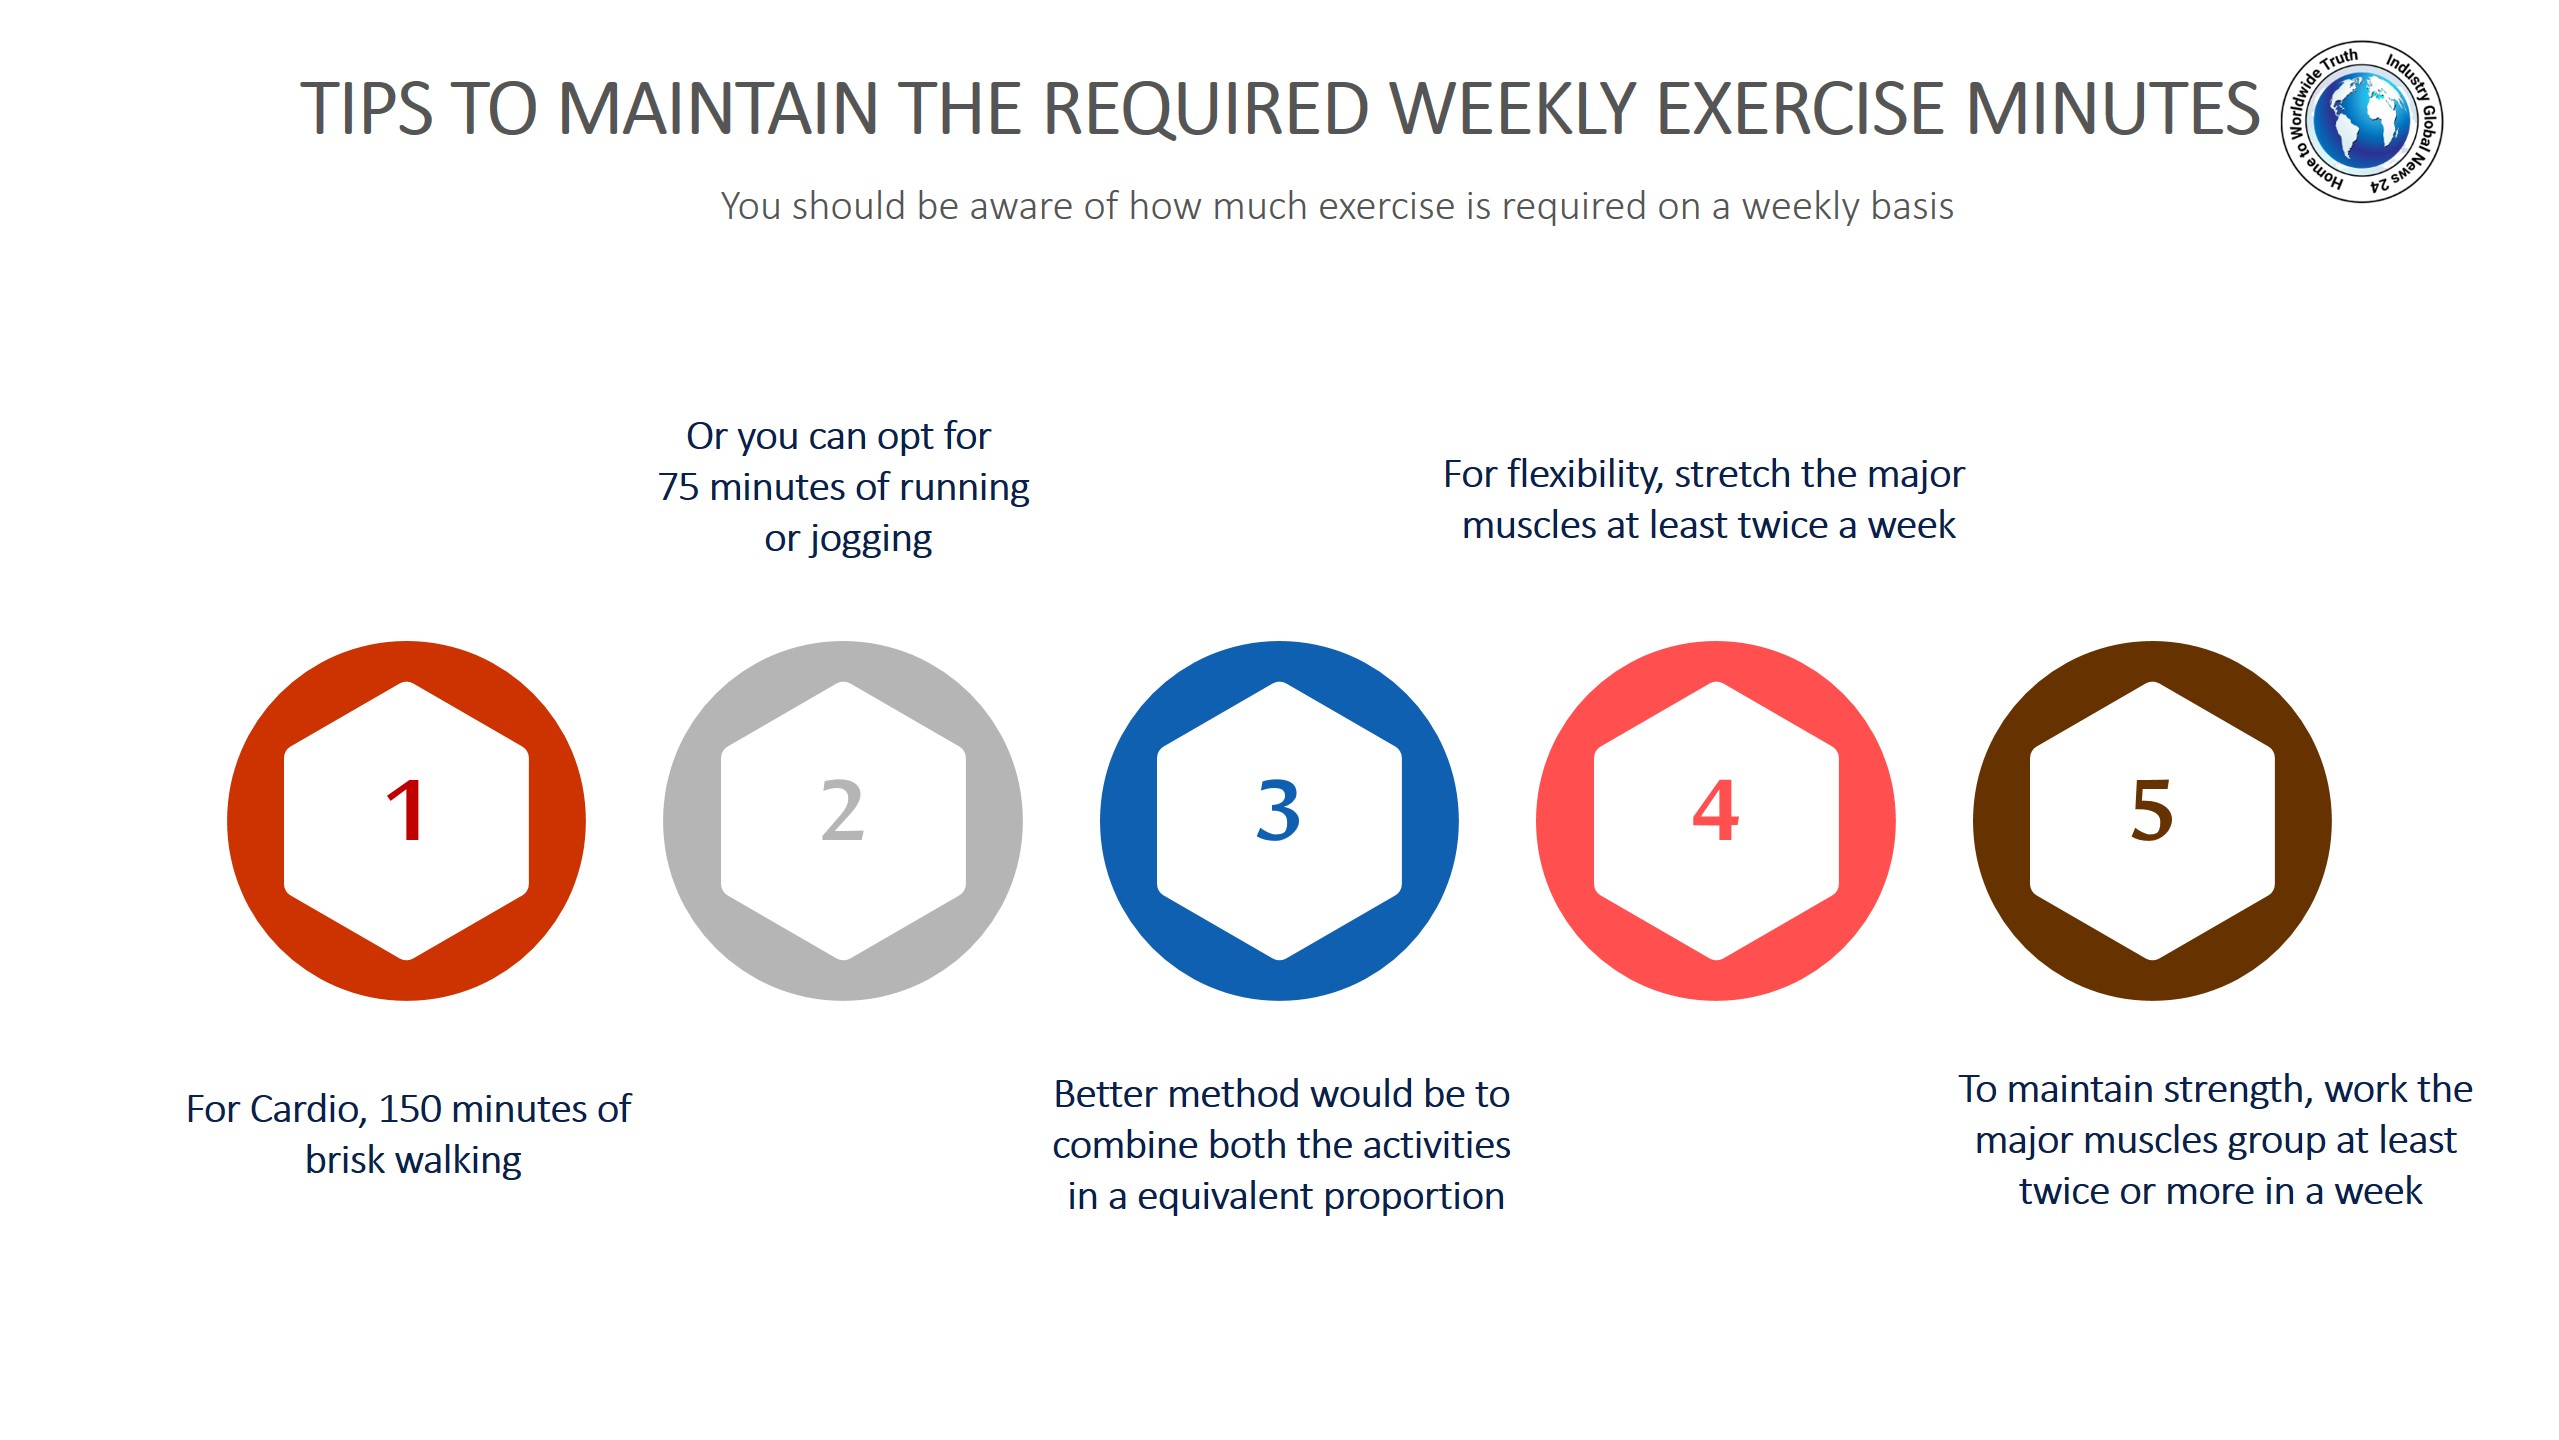 Tips to maintain the required weekly exercise minutes